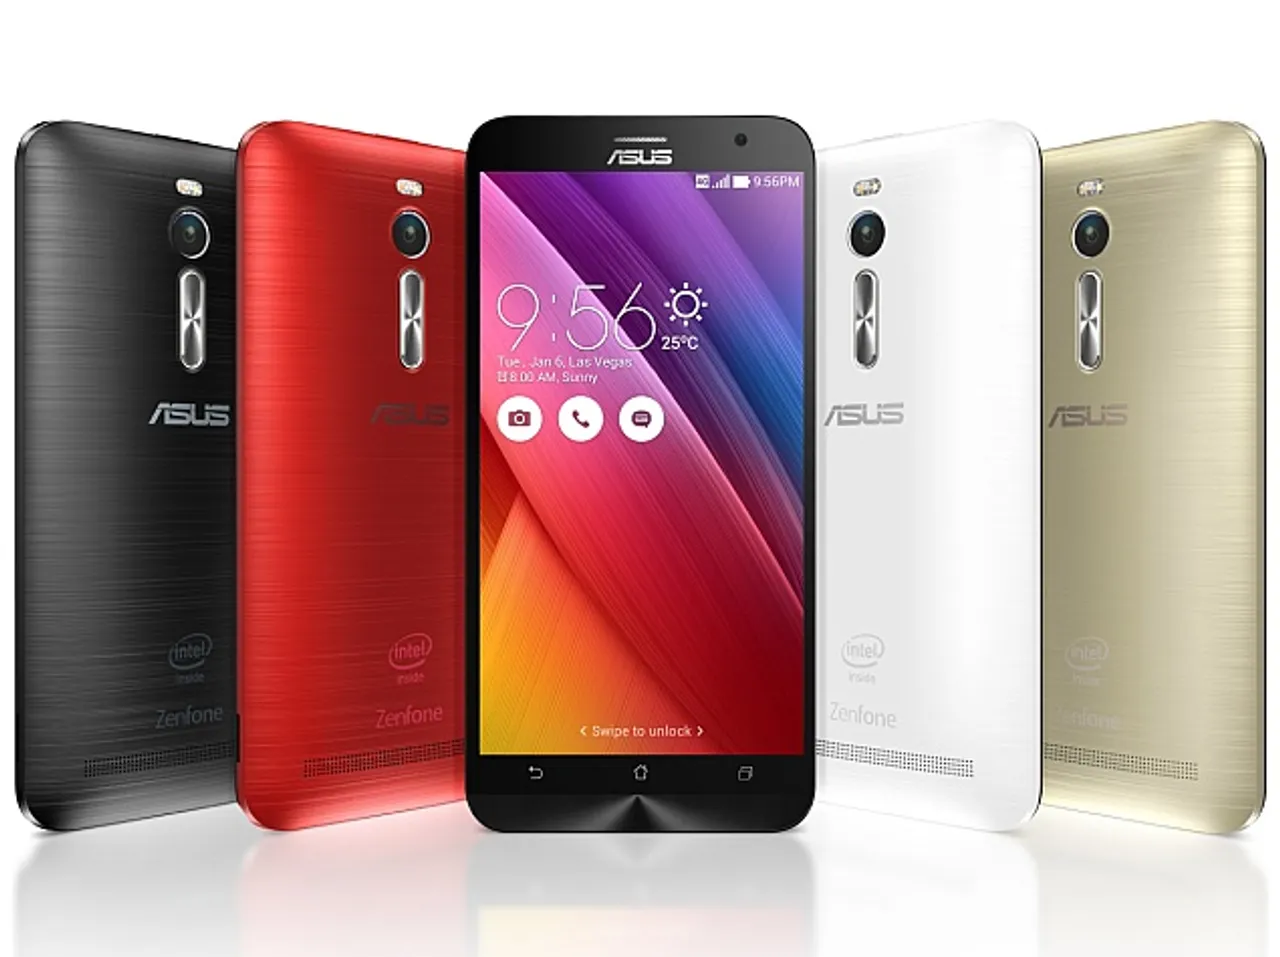 Asus set to launch its new flagship smartphone Zenfone 2 in India